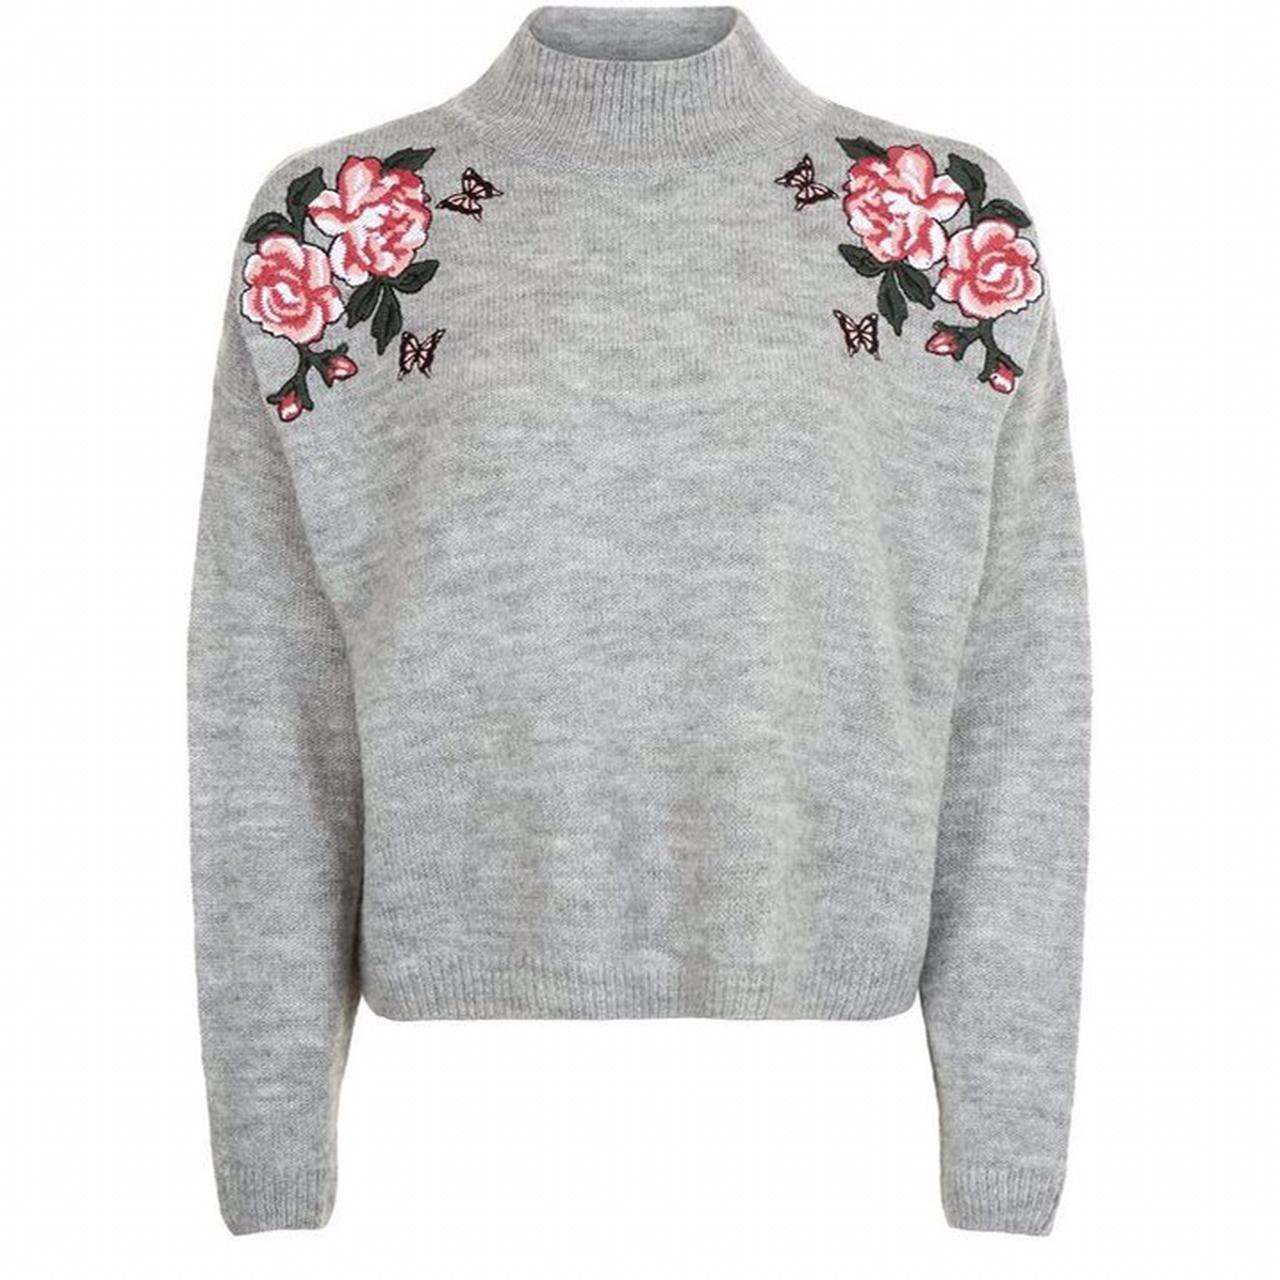 New Look Grey Floral Embroidered Bardot Neck Jumper Top Sizes 6 to 18 